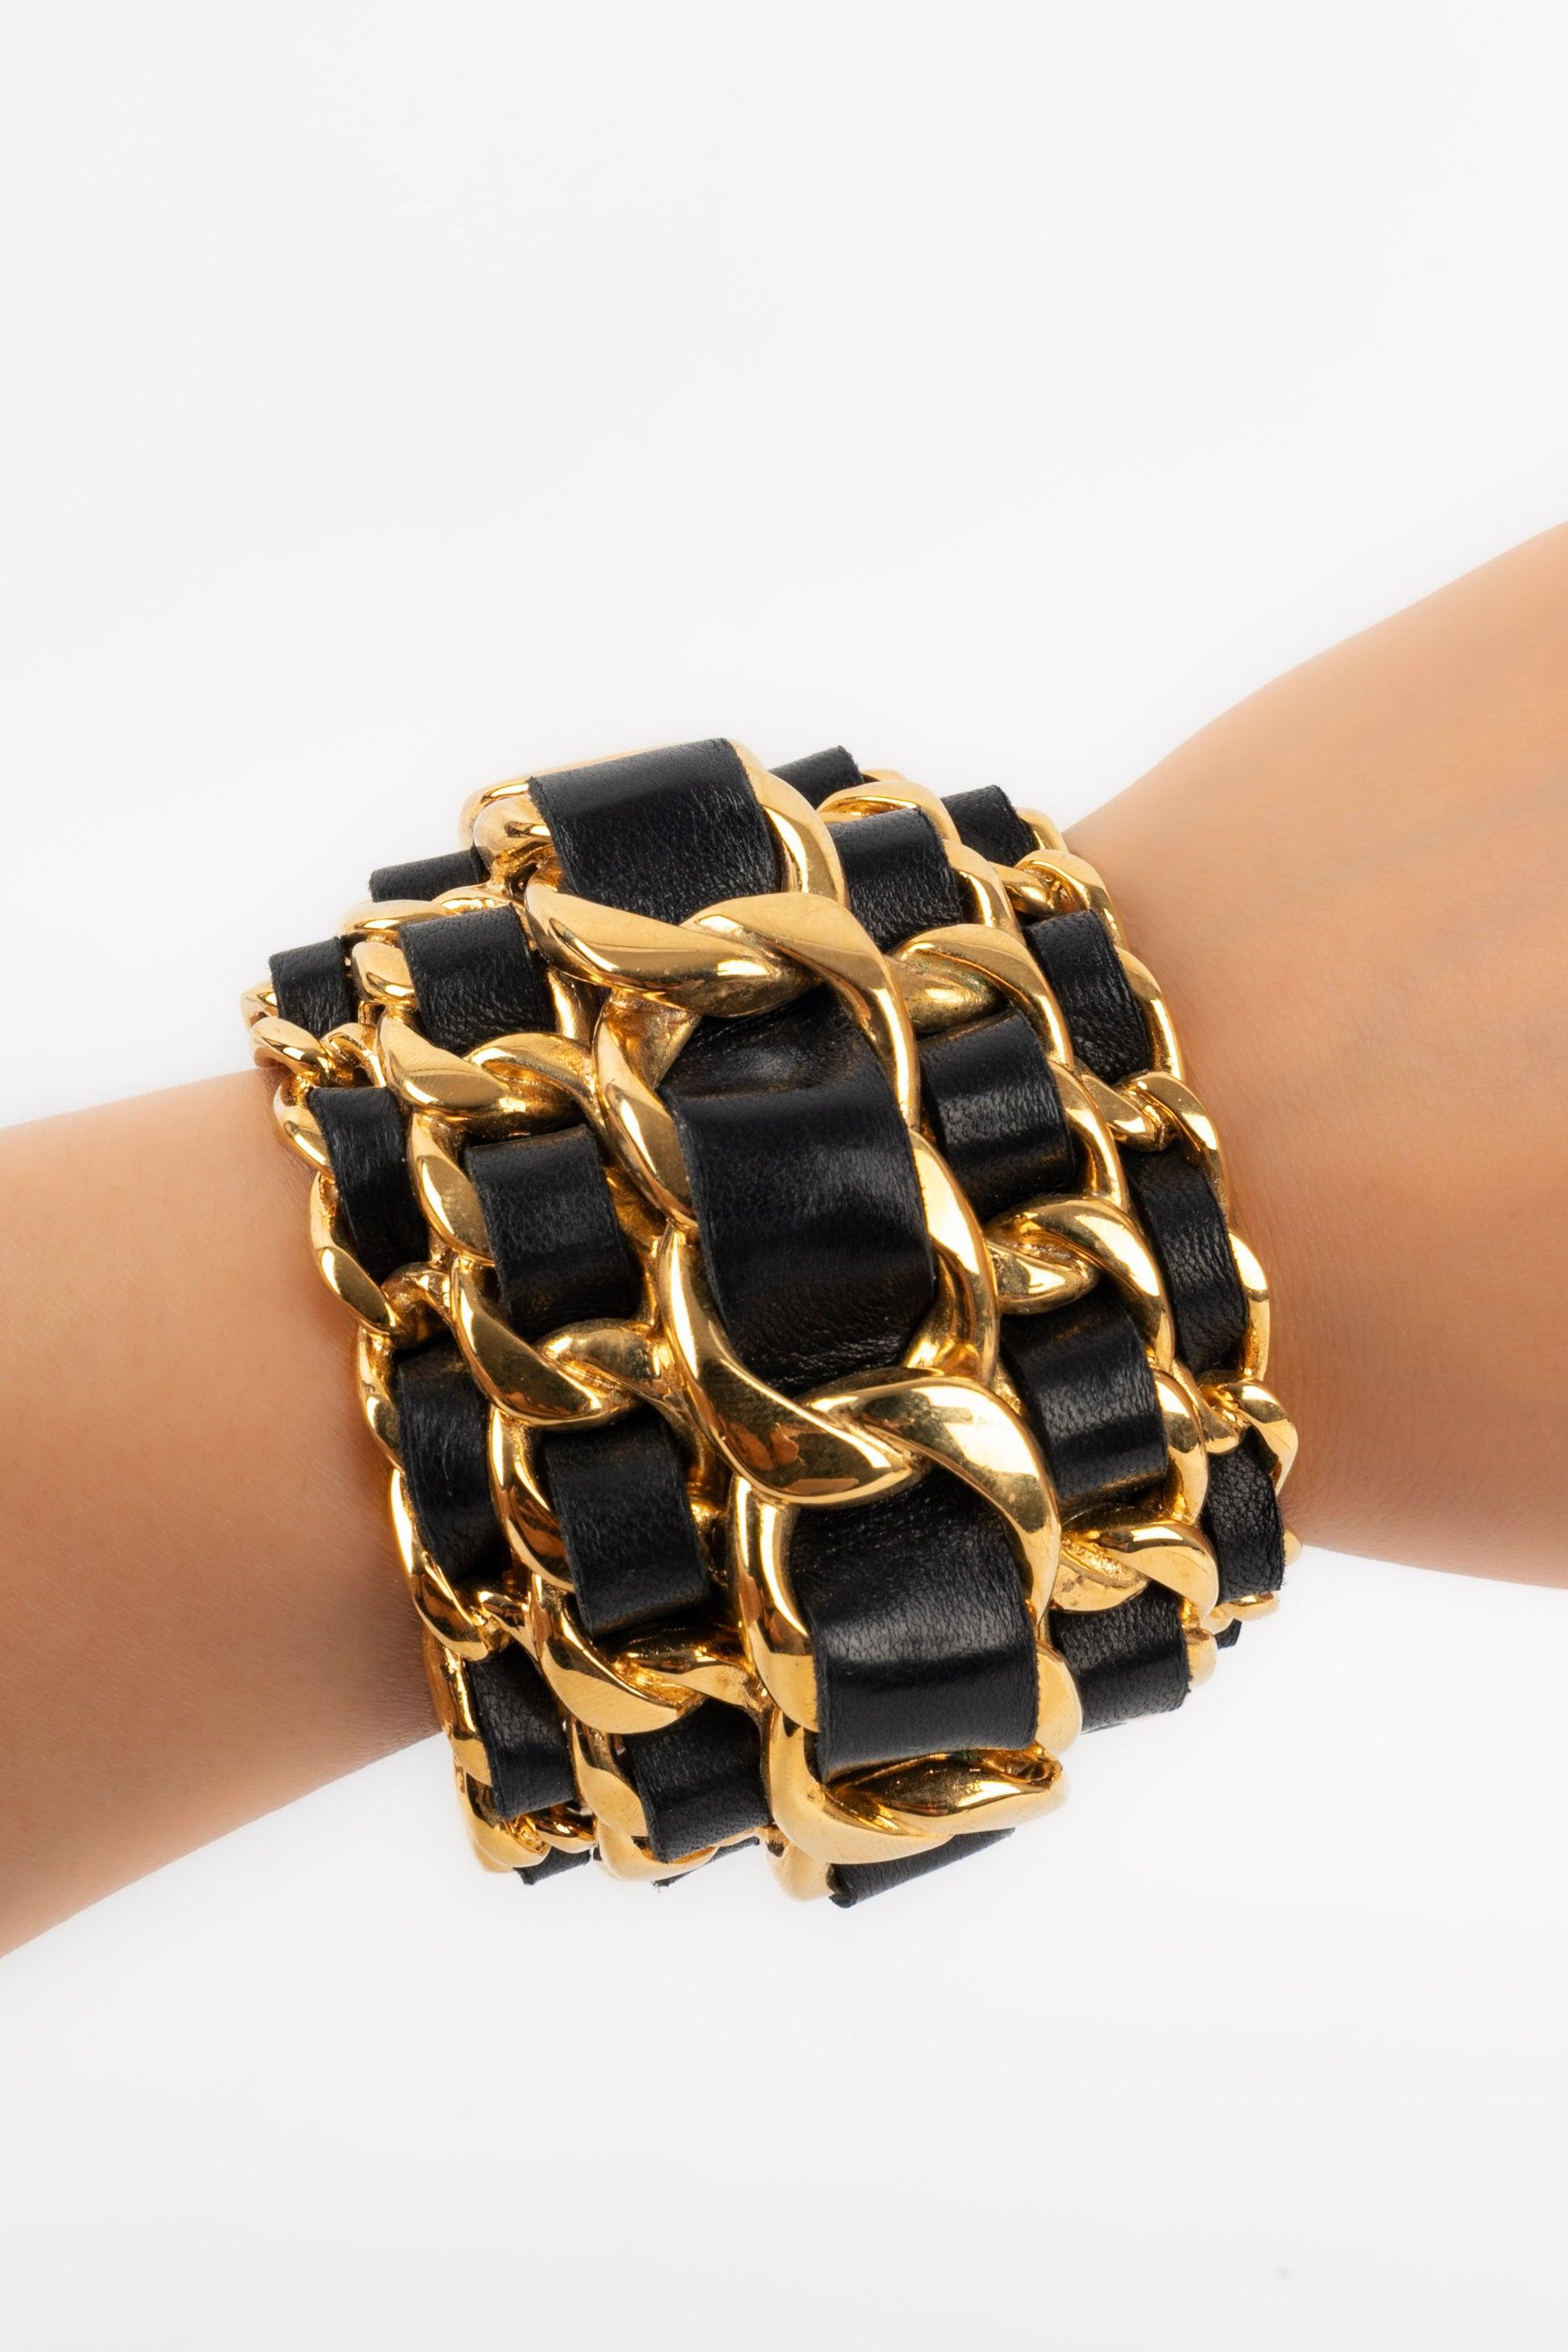 Chanel Golden Metal and Leather Cuff Bracelet with Chains, 1991 6